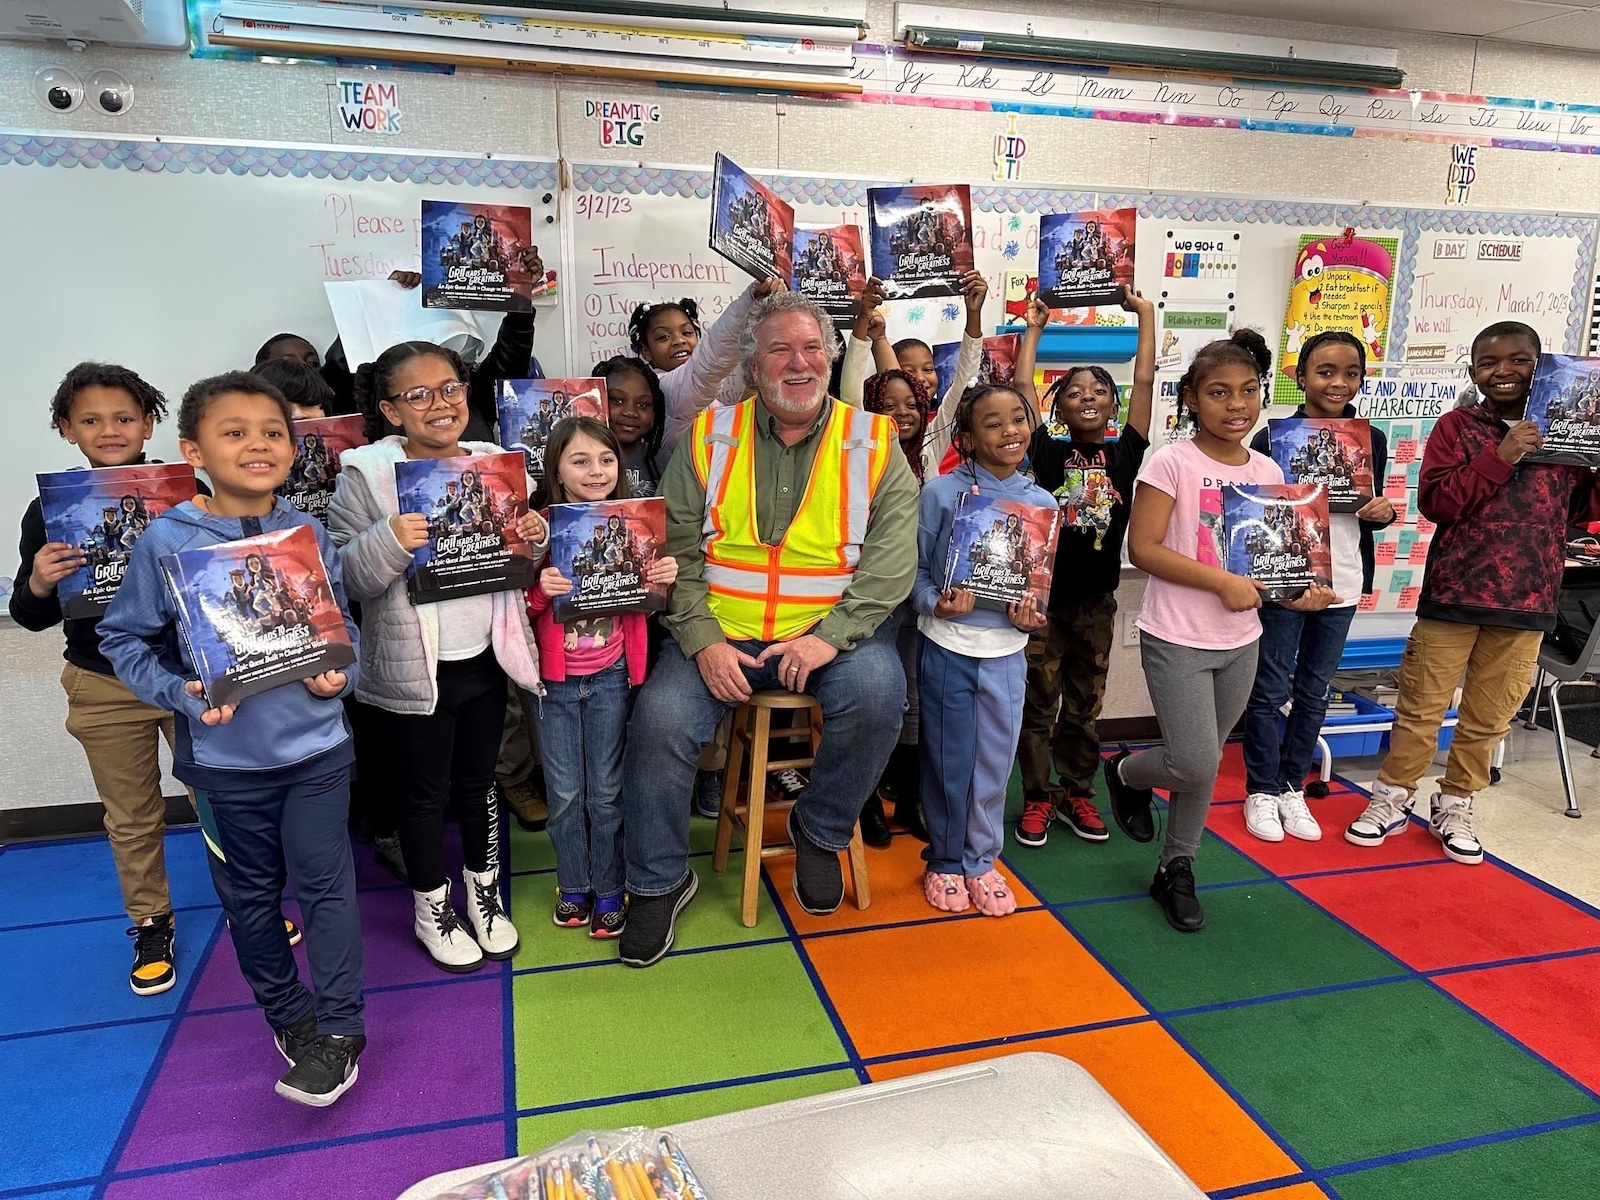 "Grit Leads to Greatness" book reading by a builder to kids in the classroom